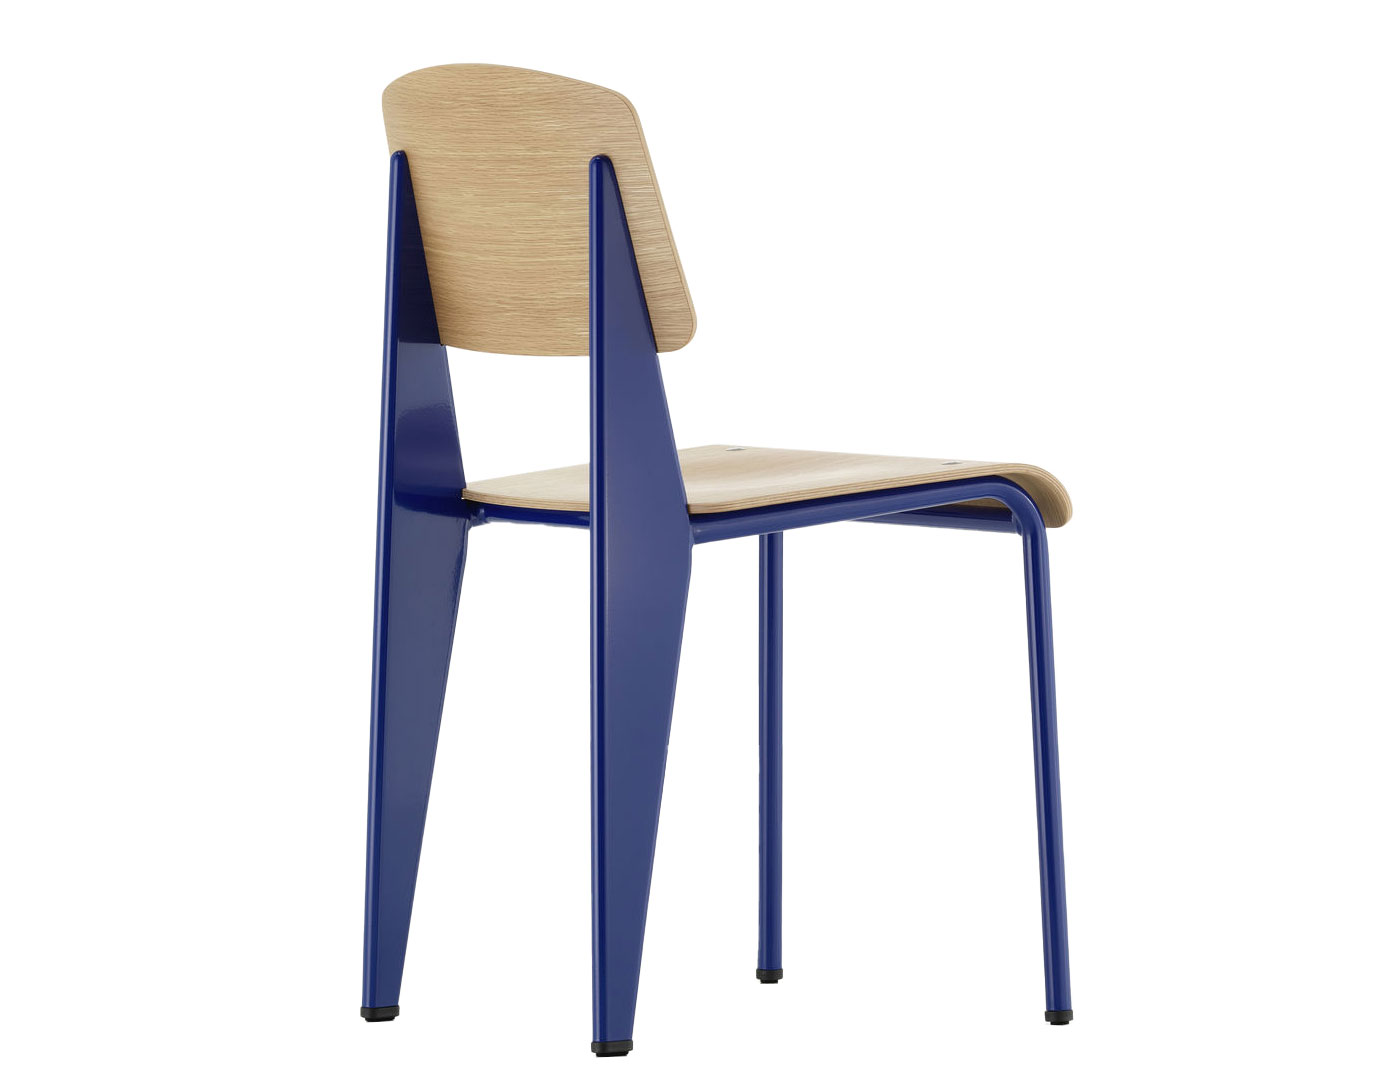 Prouve Standard Chair produced by Vitra | hive